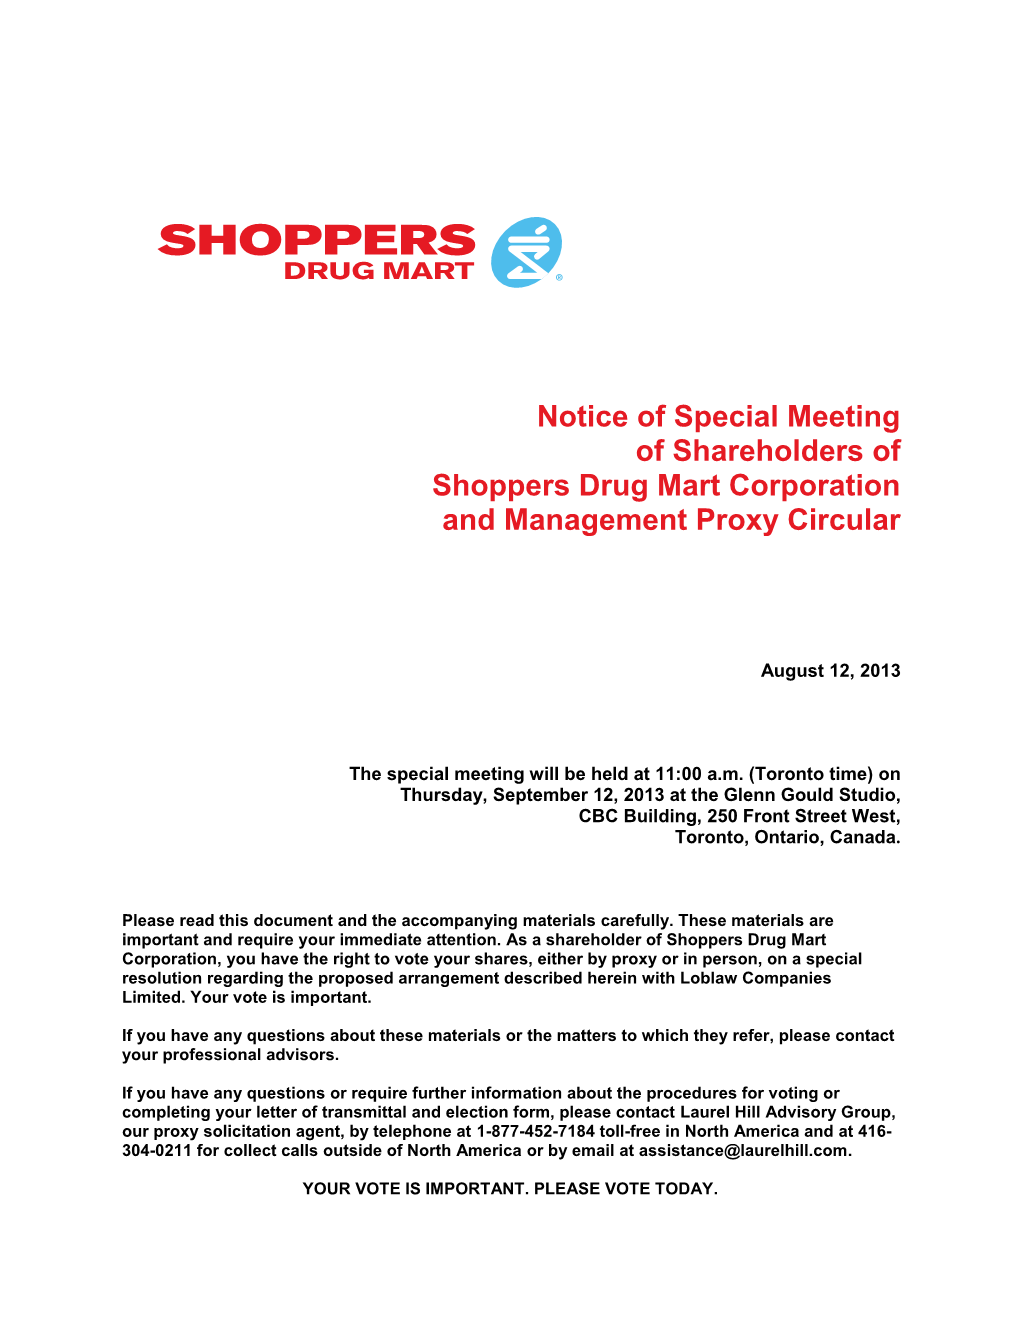 Notice of Special Meeting of Shareholders of Shoppers Drug Mart Corporation and Management Proxy Circular